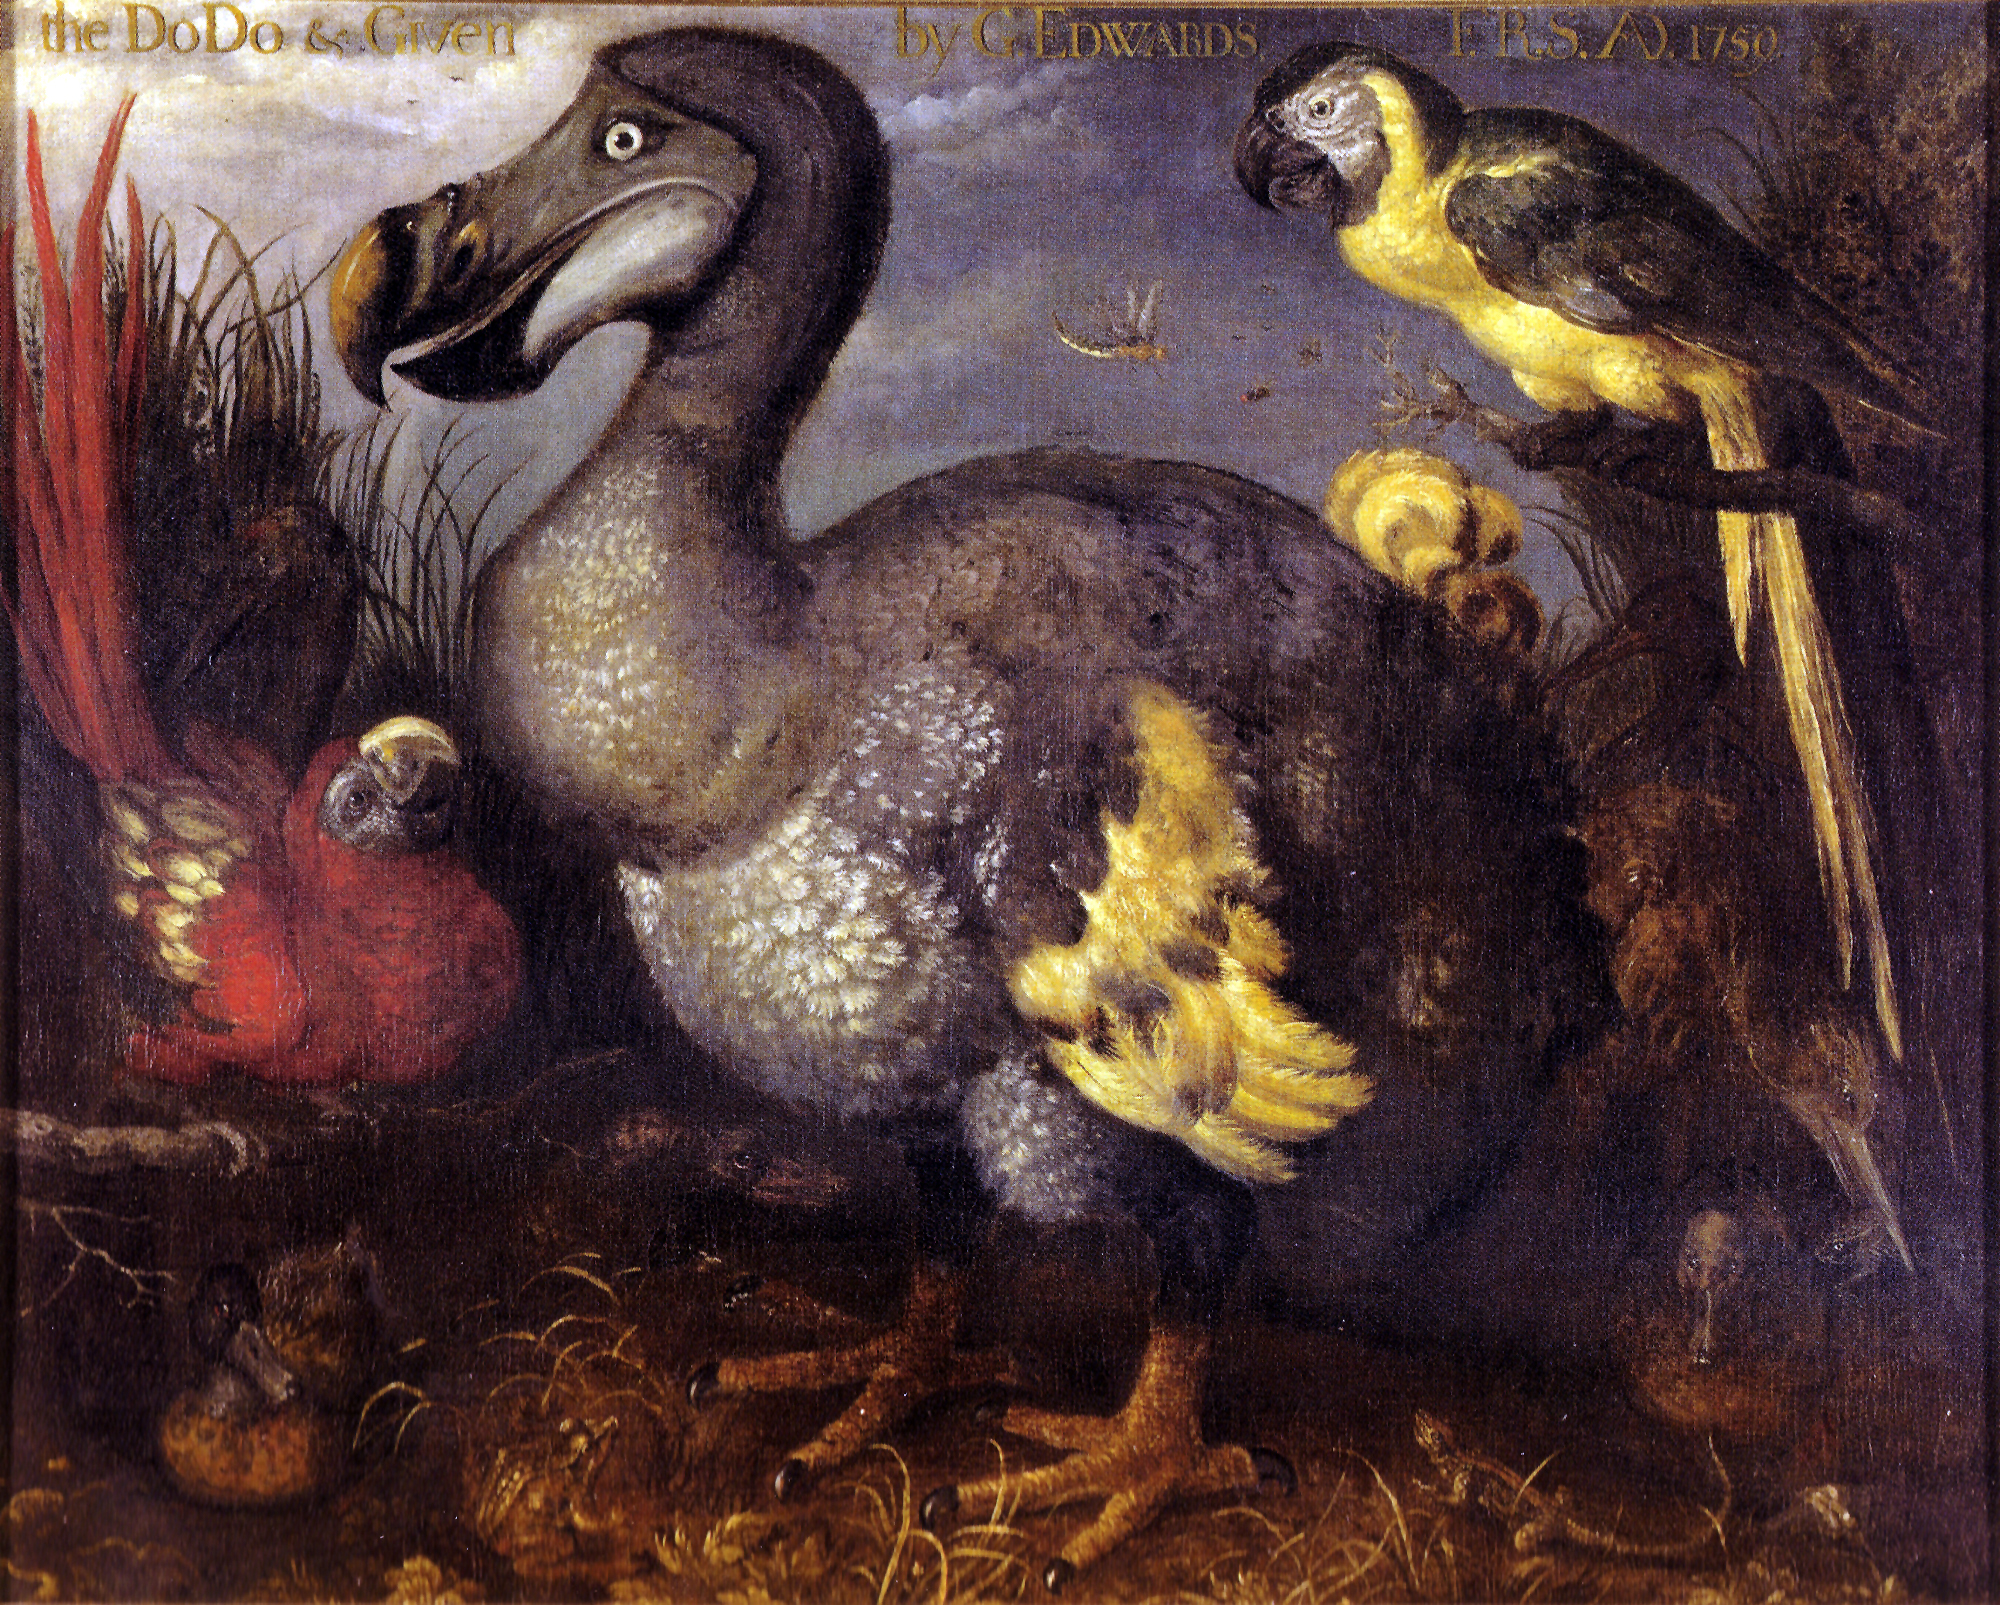 EXTINCT. The large bird in this painting from the 1620s is the extinct dodo. The dodo was a flightless bird that lived only on the island of Mauritius in the Indian Ocean. When European explorers landed on the island in the mid-1500s, they began hunting the dodo for food and chopping down its forest home. Within 100 years of its first contact with humans, the dodo was extinct. (The dodo here may have been living in a royal zoo in Europe when it was painted.) (Image via Wikipedia) 